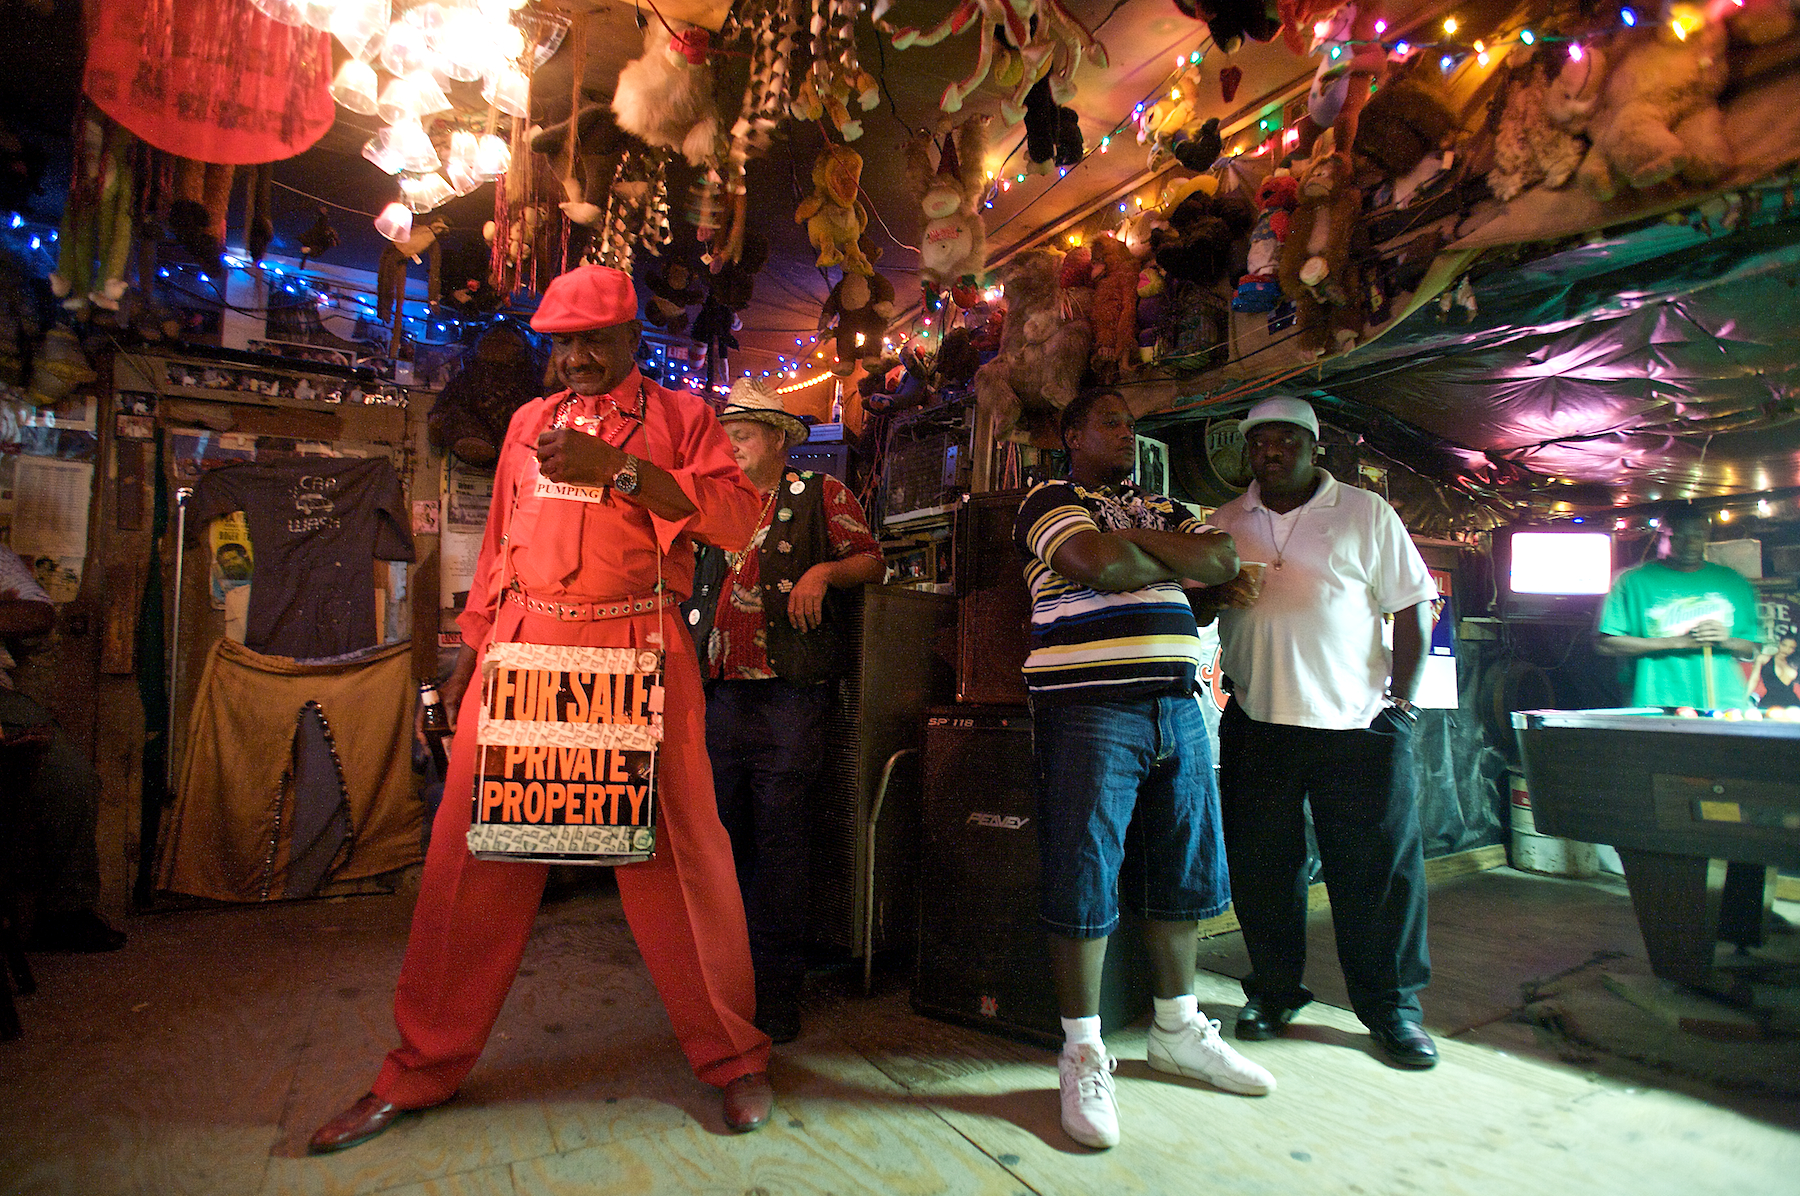 The Last Remaining Juke Joints in America